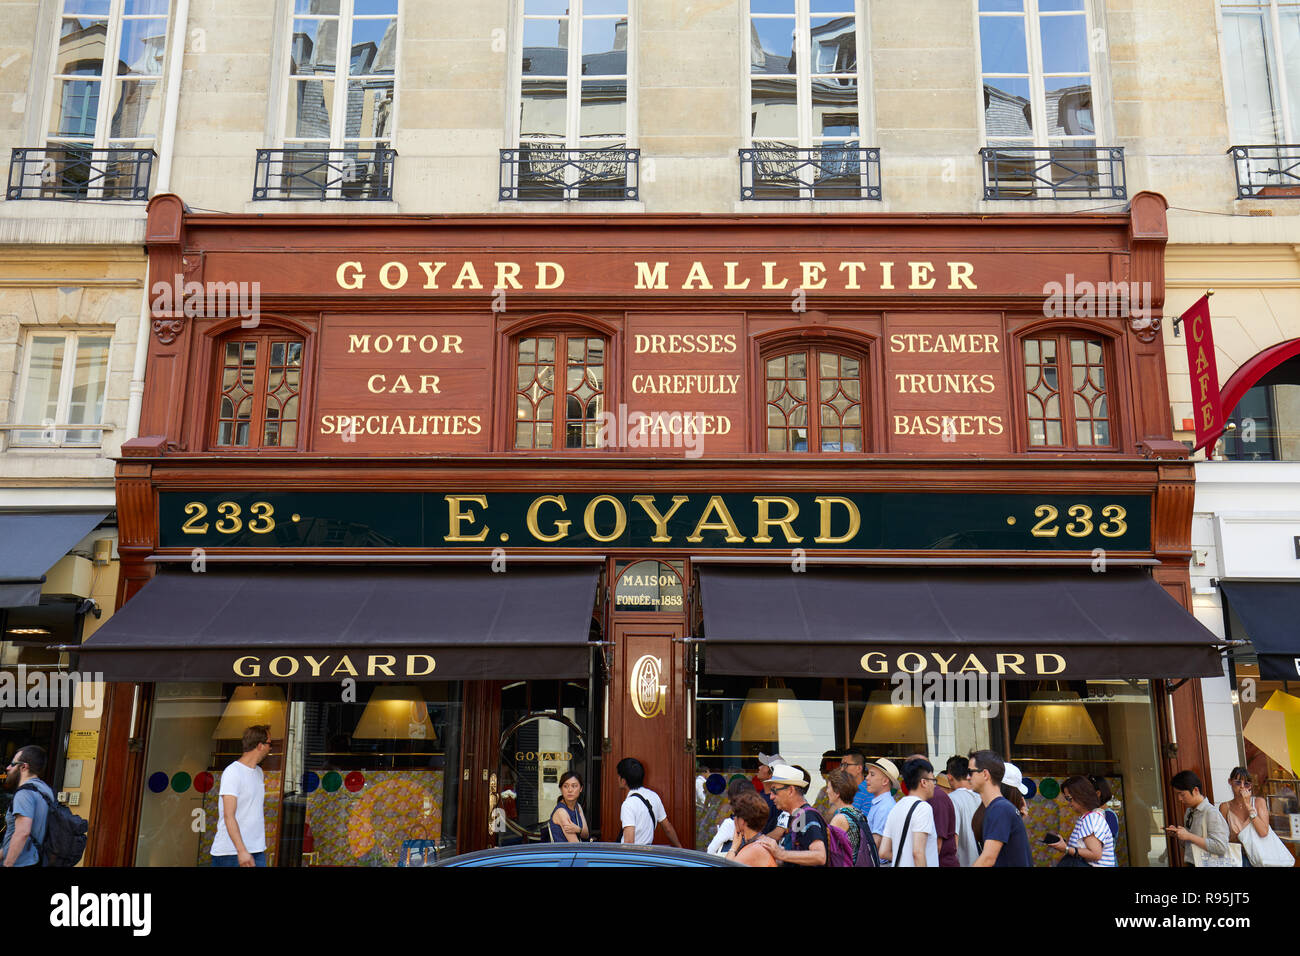 Goyard Just Opened Another Boutique in Paris!